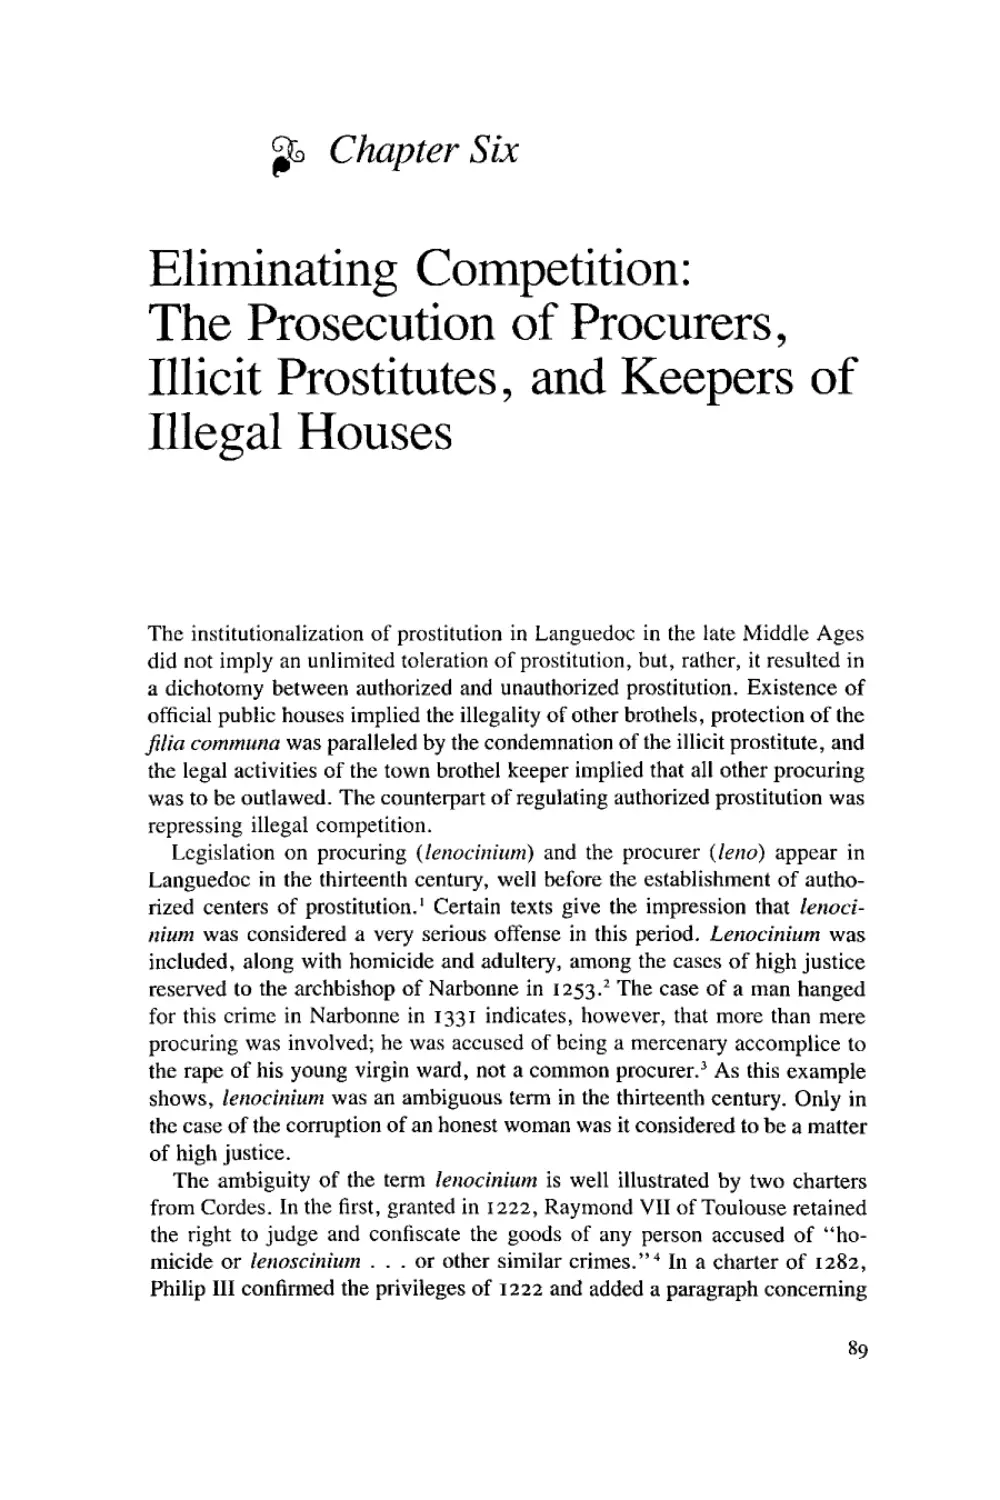 6. Eliminating Competition: The Prosecution of Procurers, Illicit Prostitutes, and Keepers of Illegal Houses